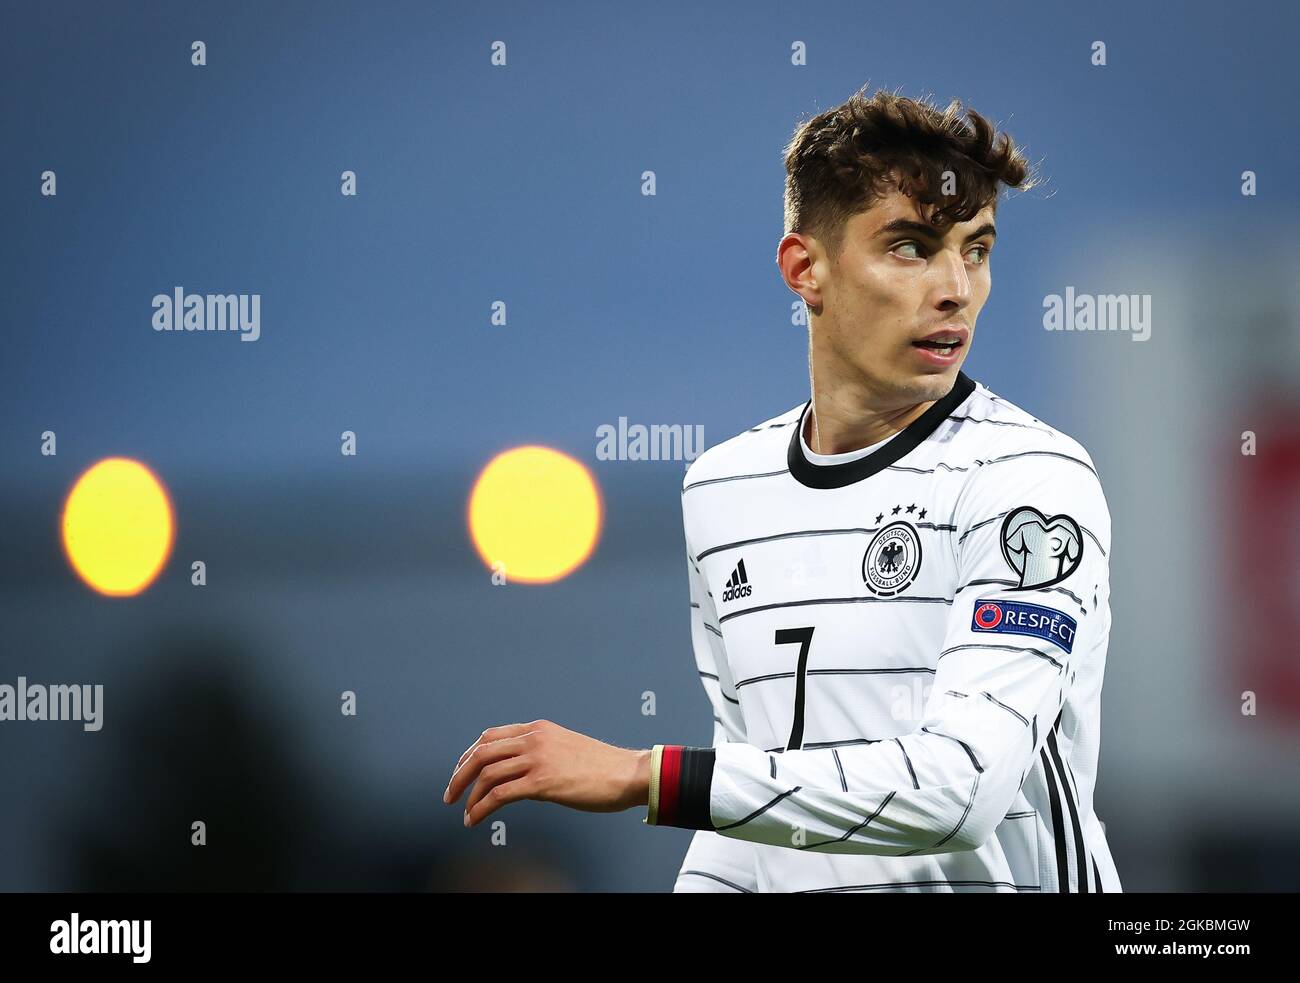 08 September 2021, Iceland, Reykjavik: Football: World Cup Qualification, Iceland - Germany, Group Stage, Group J, Matchday 6 at Laugardalsvöllur Stadium. Kai Havertz of Germany walks across the pitch during the match. Photo: Christian Charisius/dpa Stock Photo